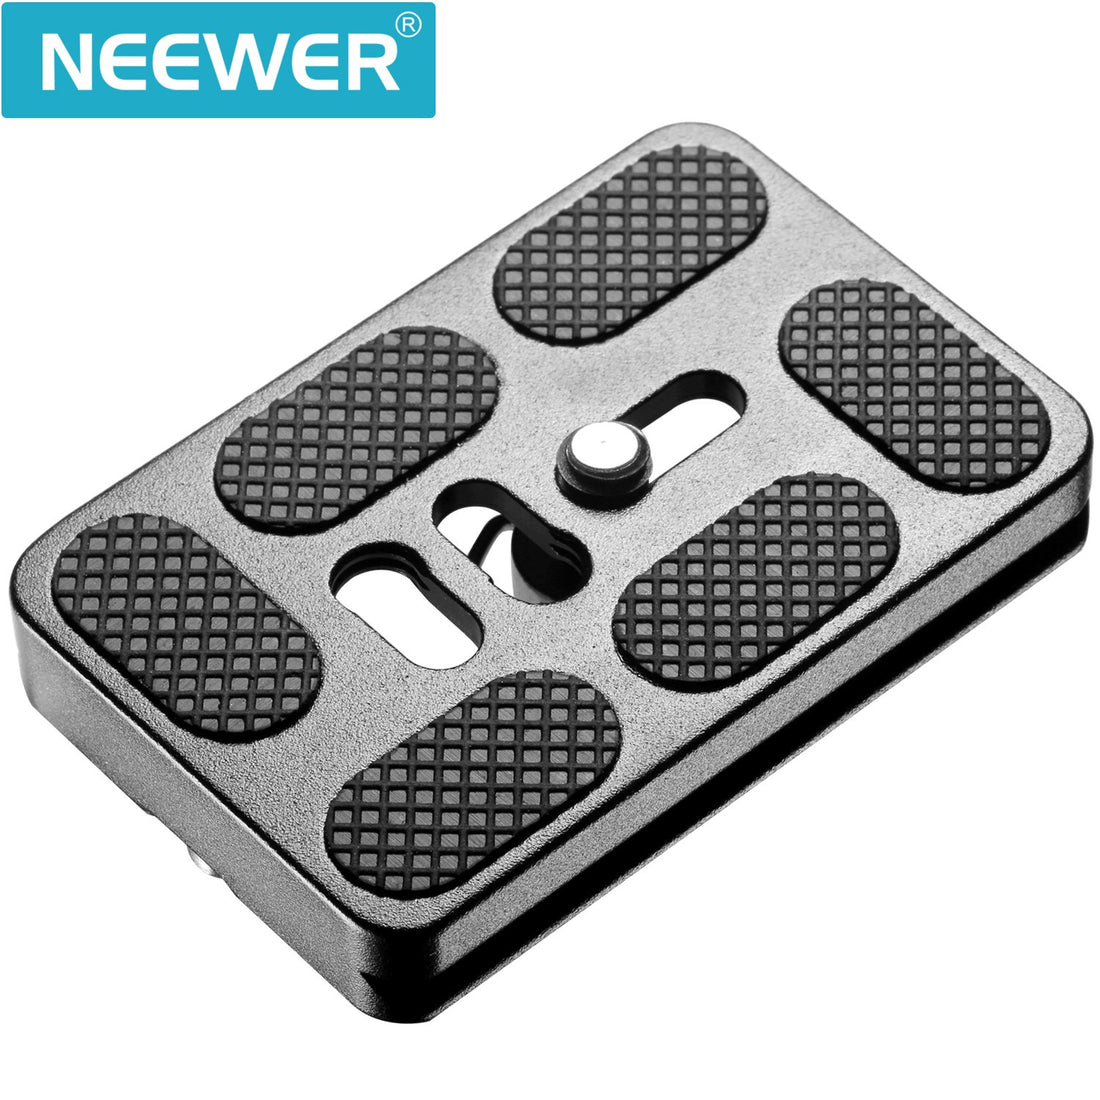 Neewer 2 Pieces Metal PU-60 60 Millimeter Universal Quick Shoe Plate with 1/4 inch Screw,Fits Arca-Swiss Standard for Camera Tripod Ball Head(Black)